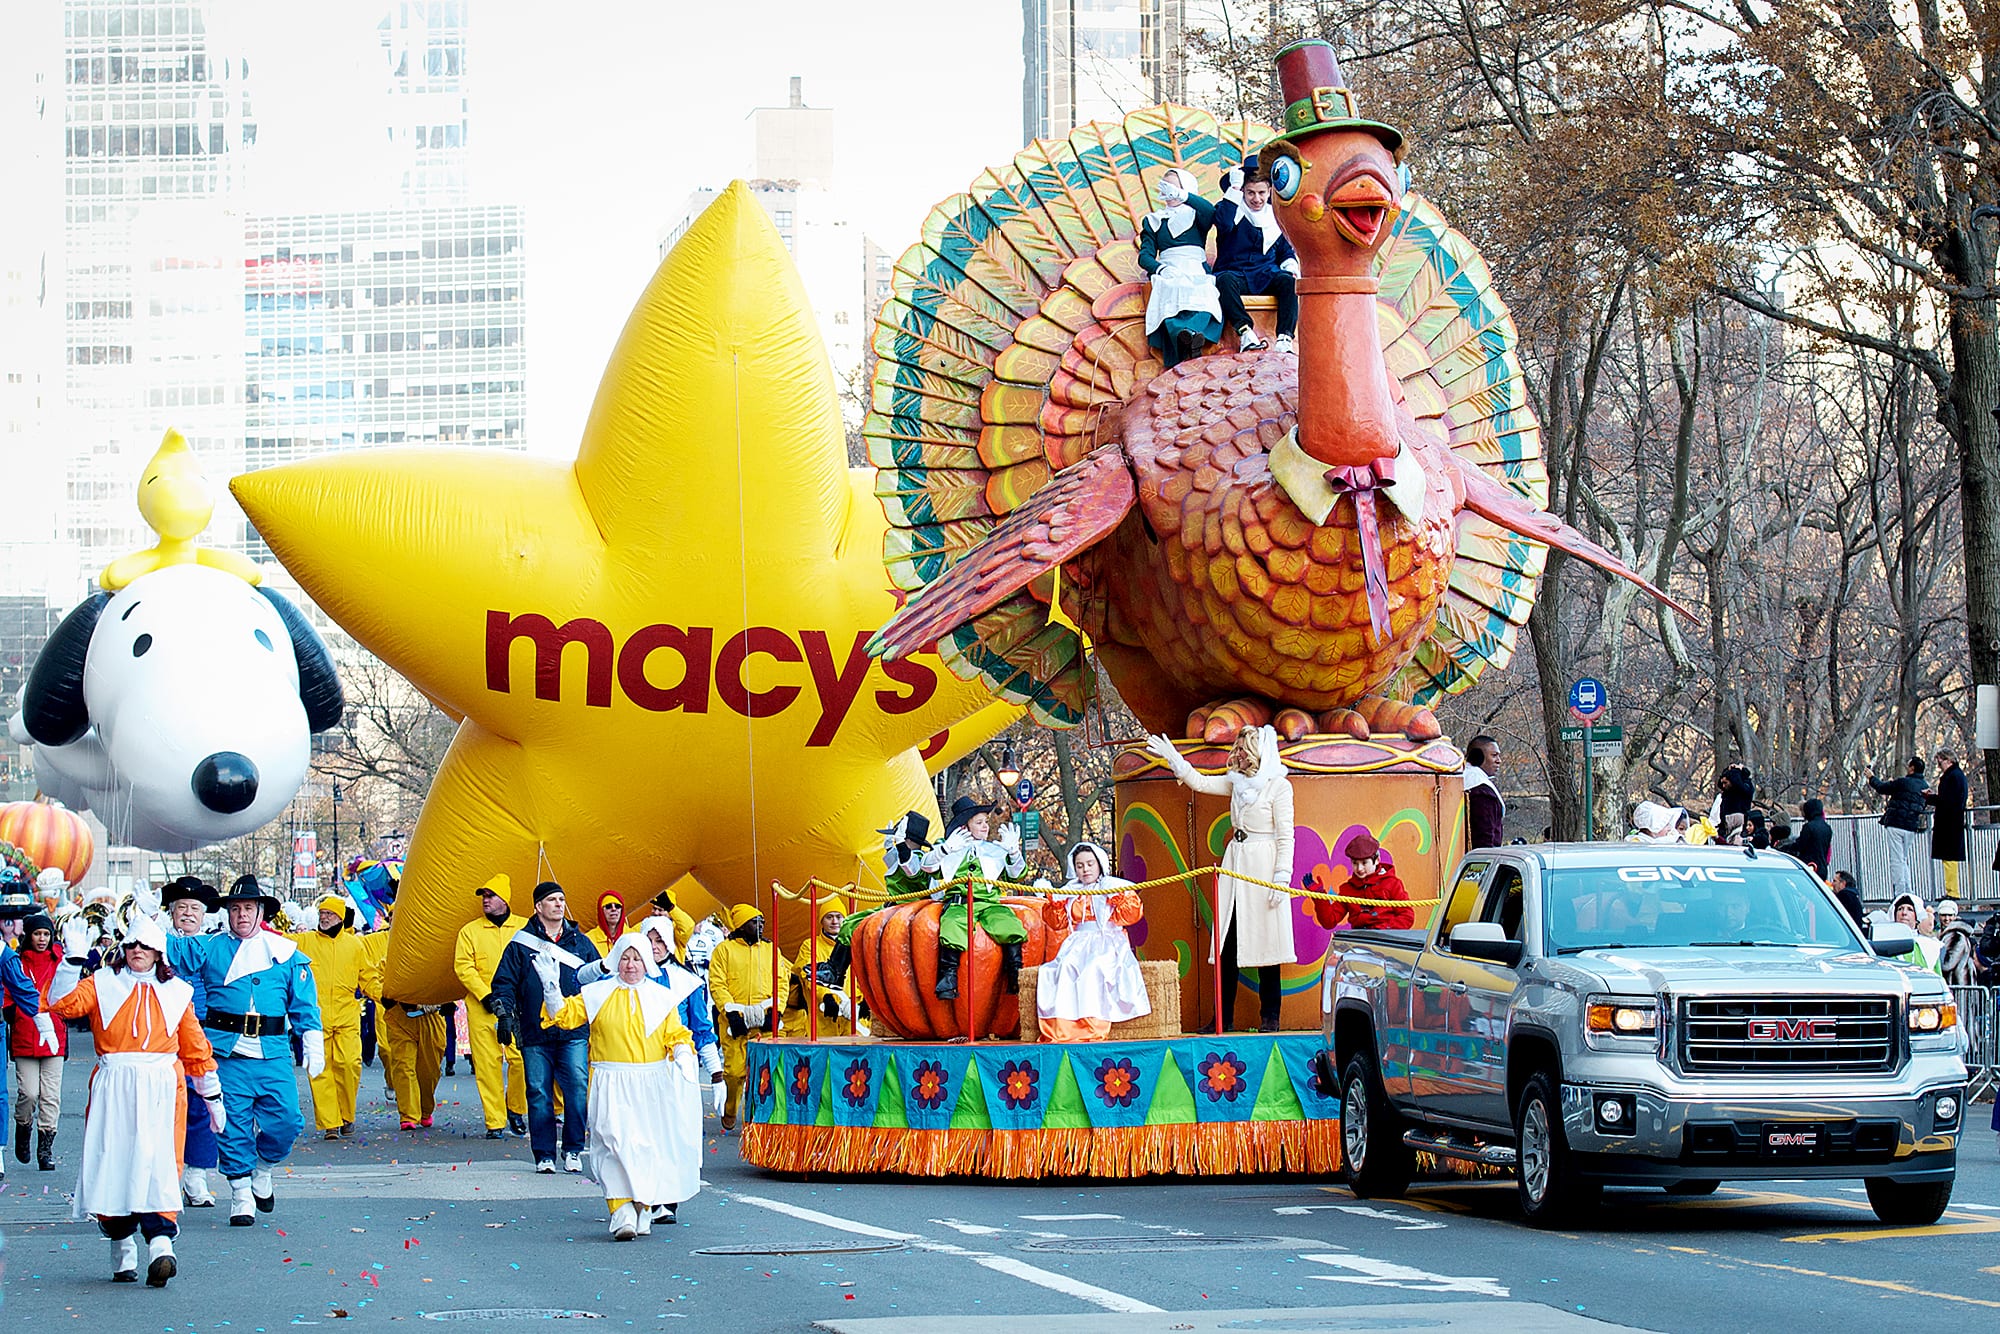 How to Stream the Macy’s Thanksgiving Day Parade on Roku, Fire TV - Stream Macy's Thanksgiving Day Parade Ipad